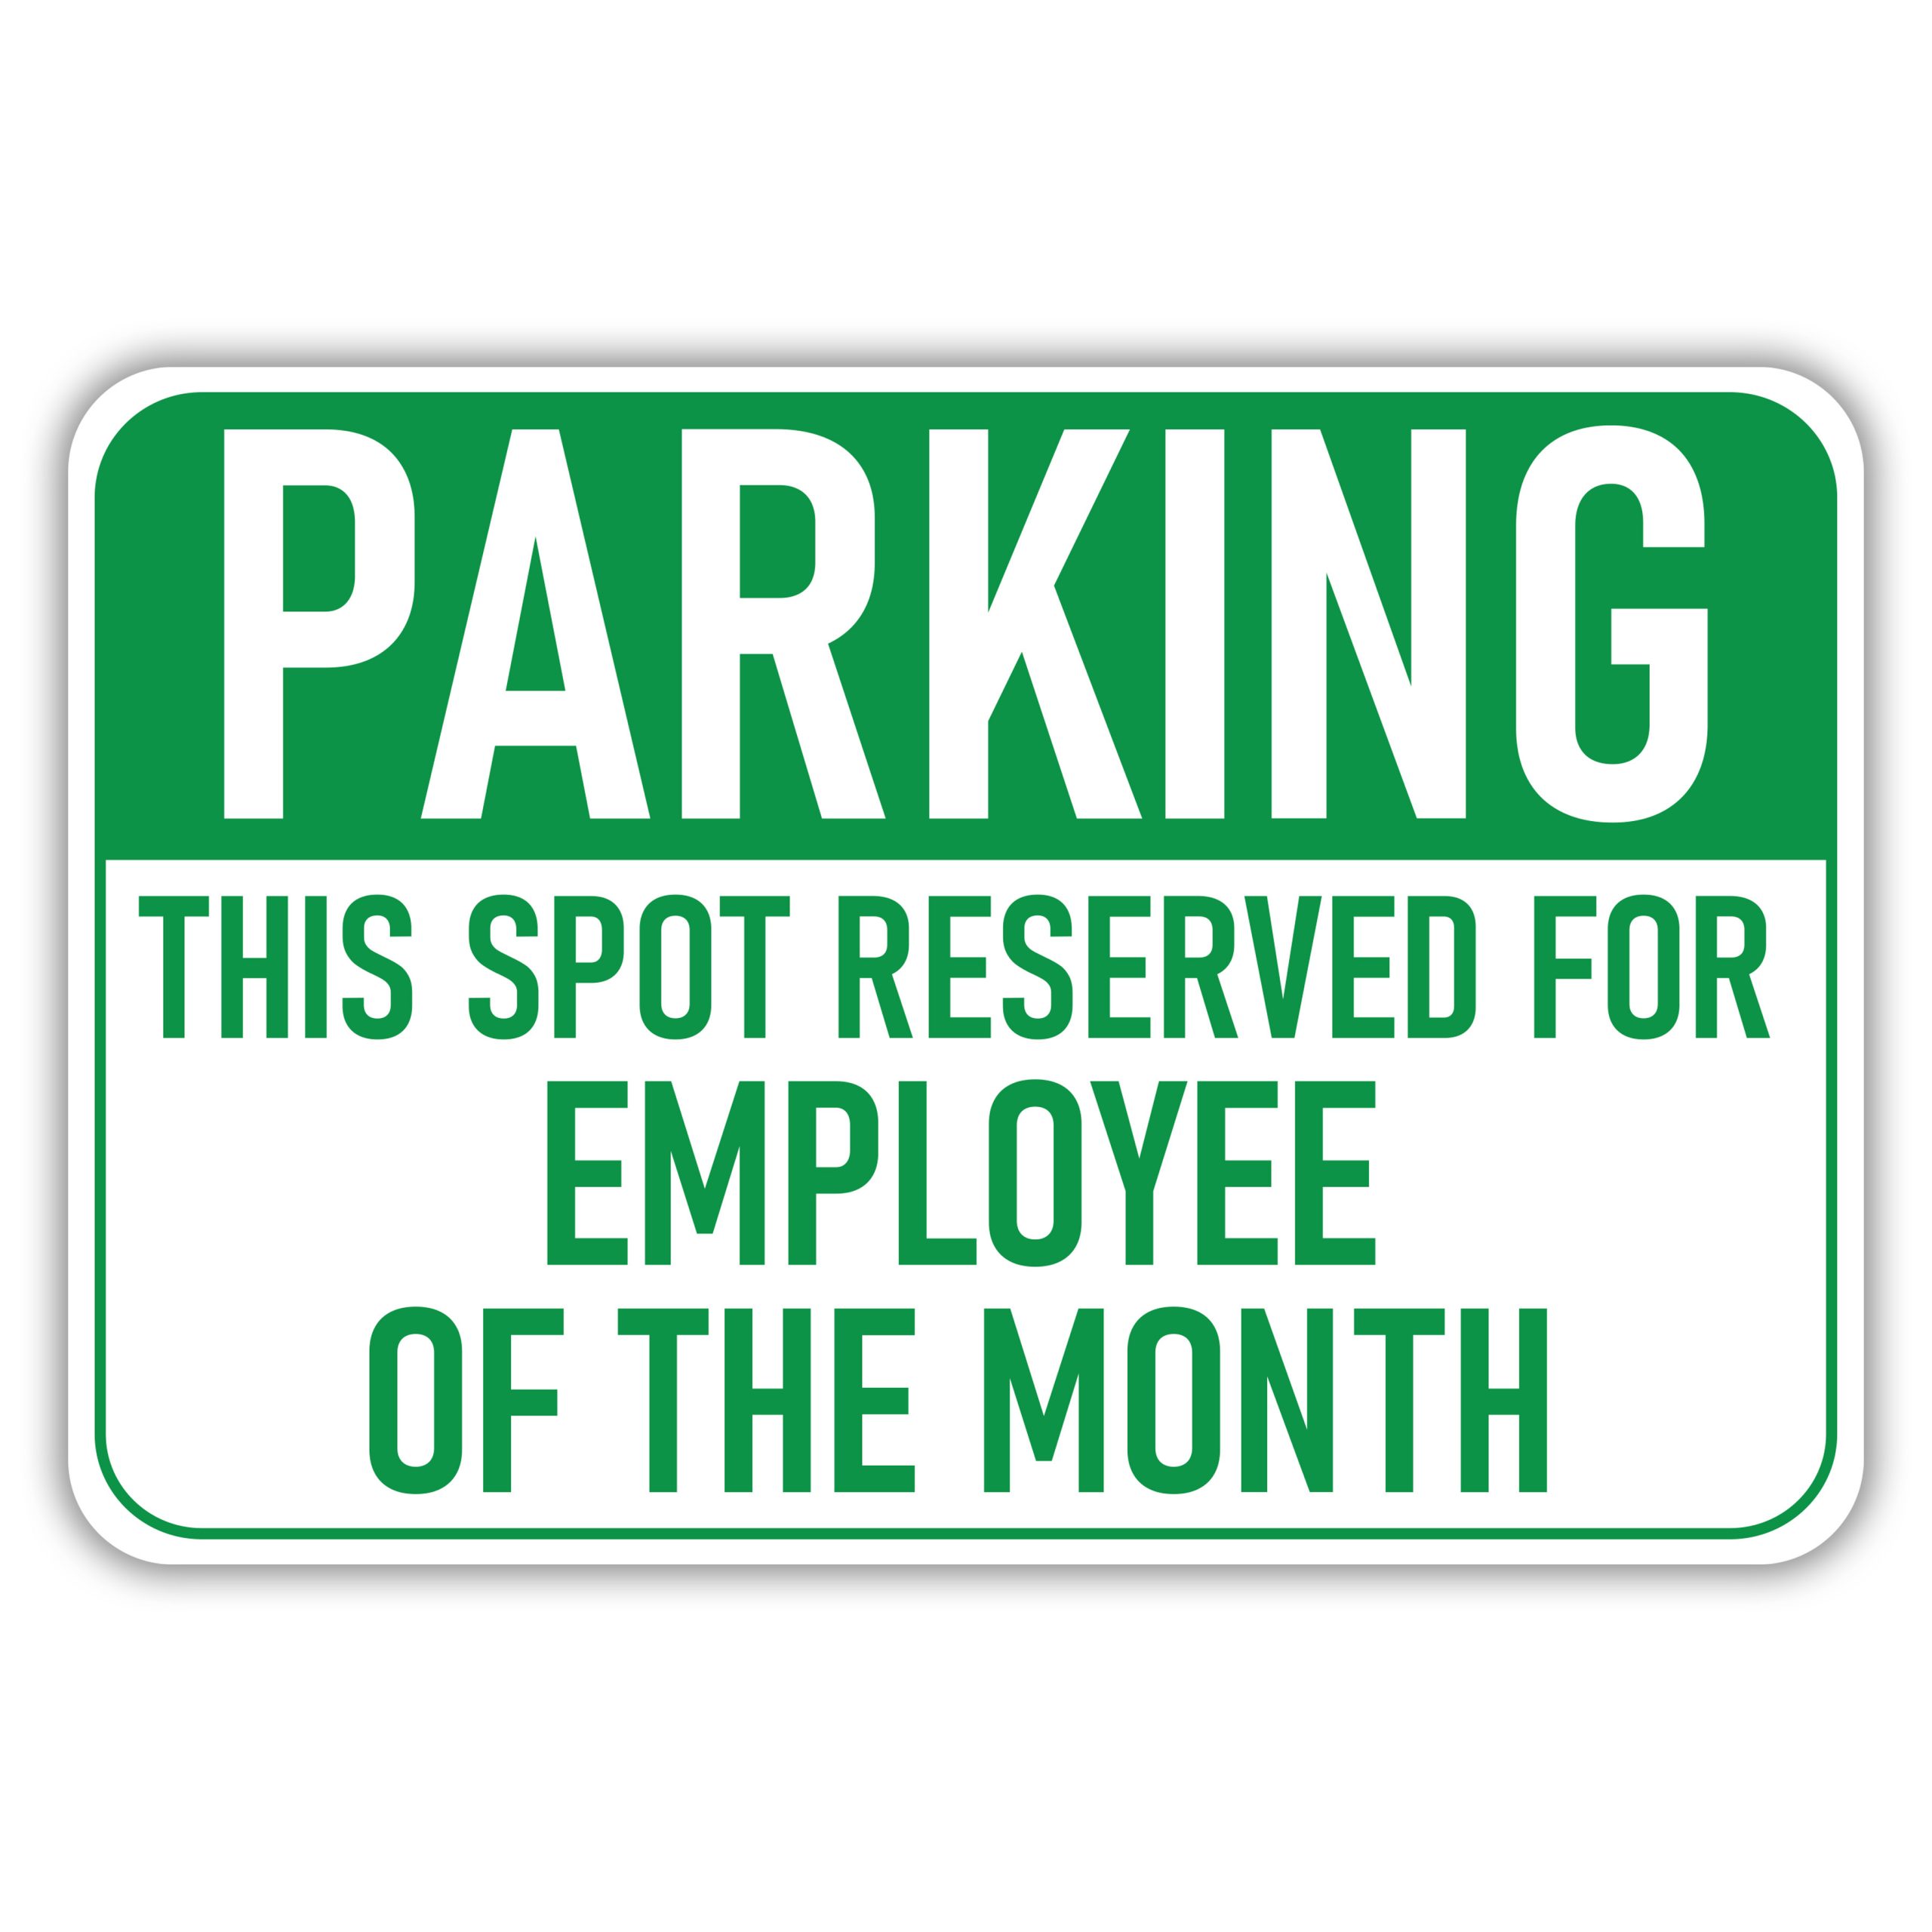 Parking Reserved For Employee Of The Month American Sign Company